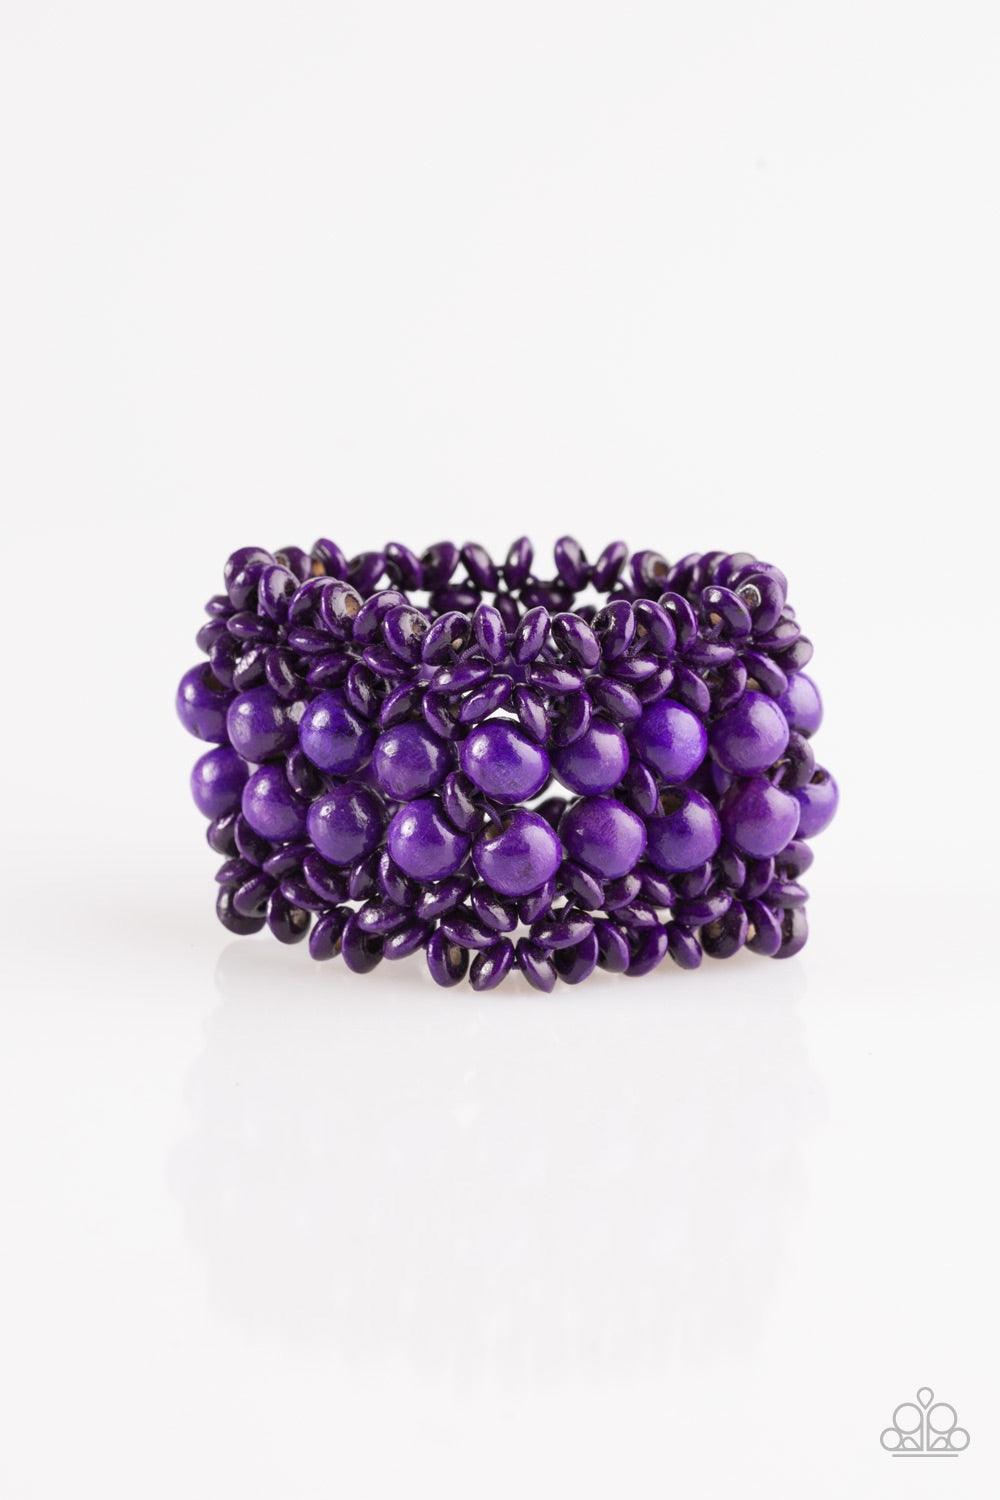 Paparazzi Accessories Tropical Bliss - Purple Purple wooden accents are threaded along elastic stretchy bands, creating an ornate bracelet. Rounded purple wooden beads line the center of the summery pattern for a bold finish. Jewelry